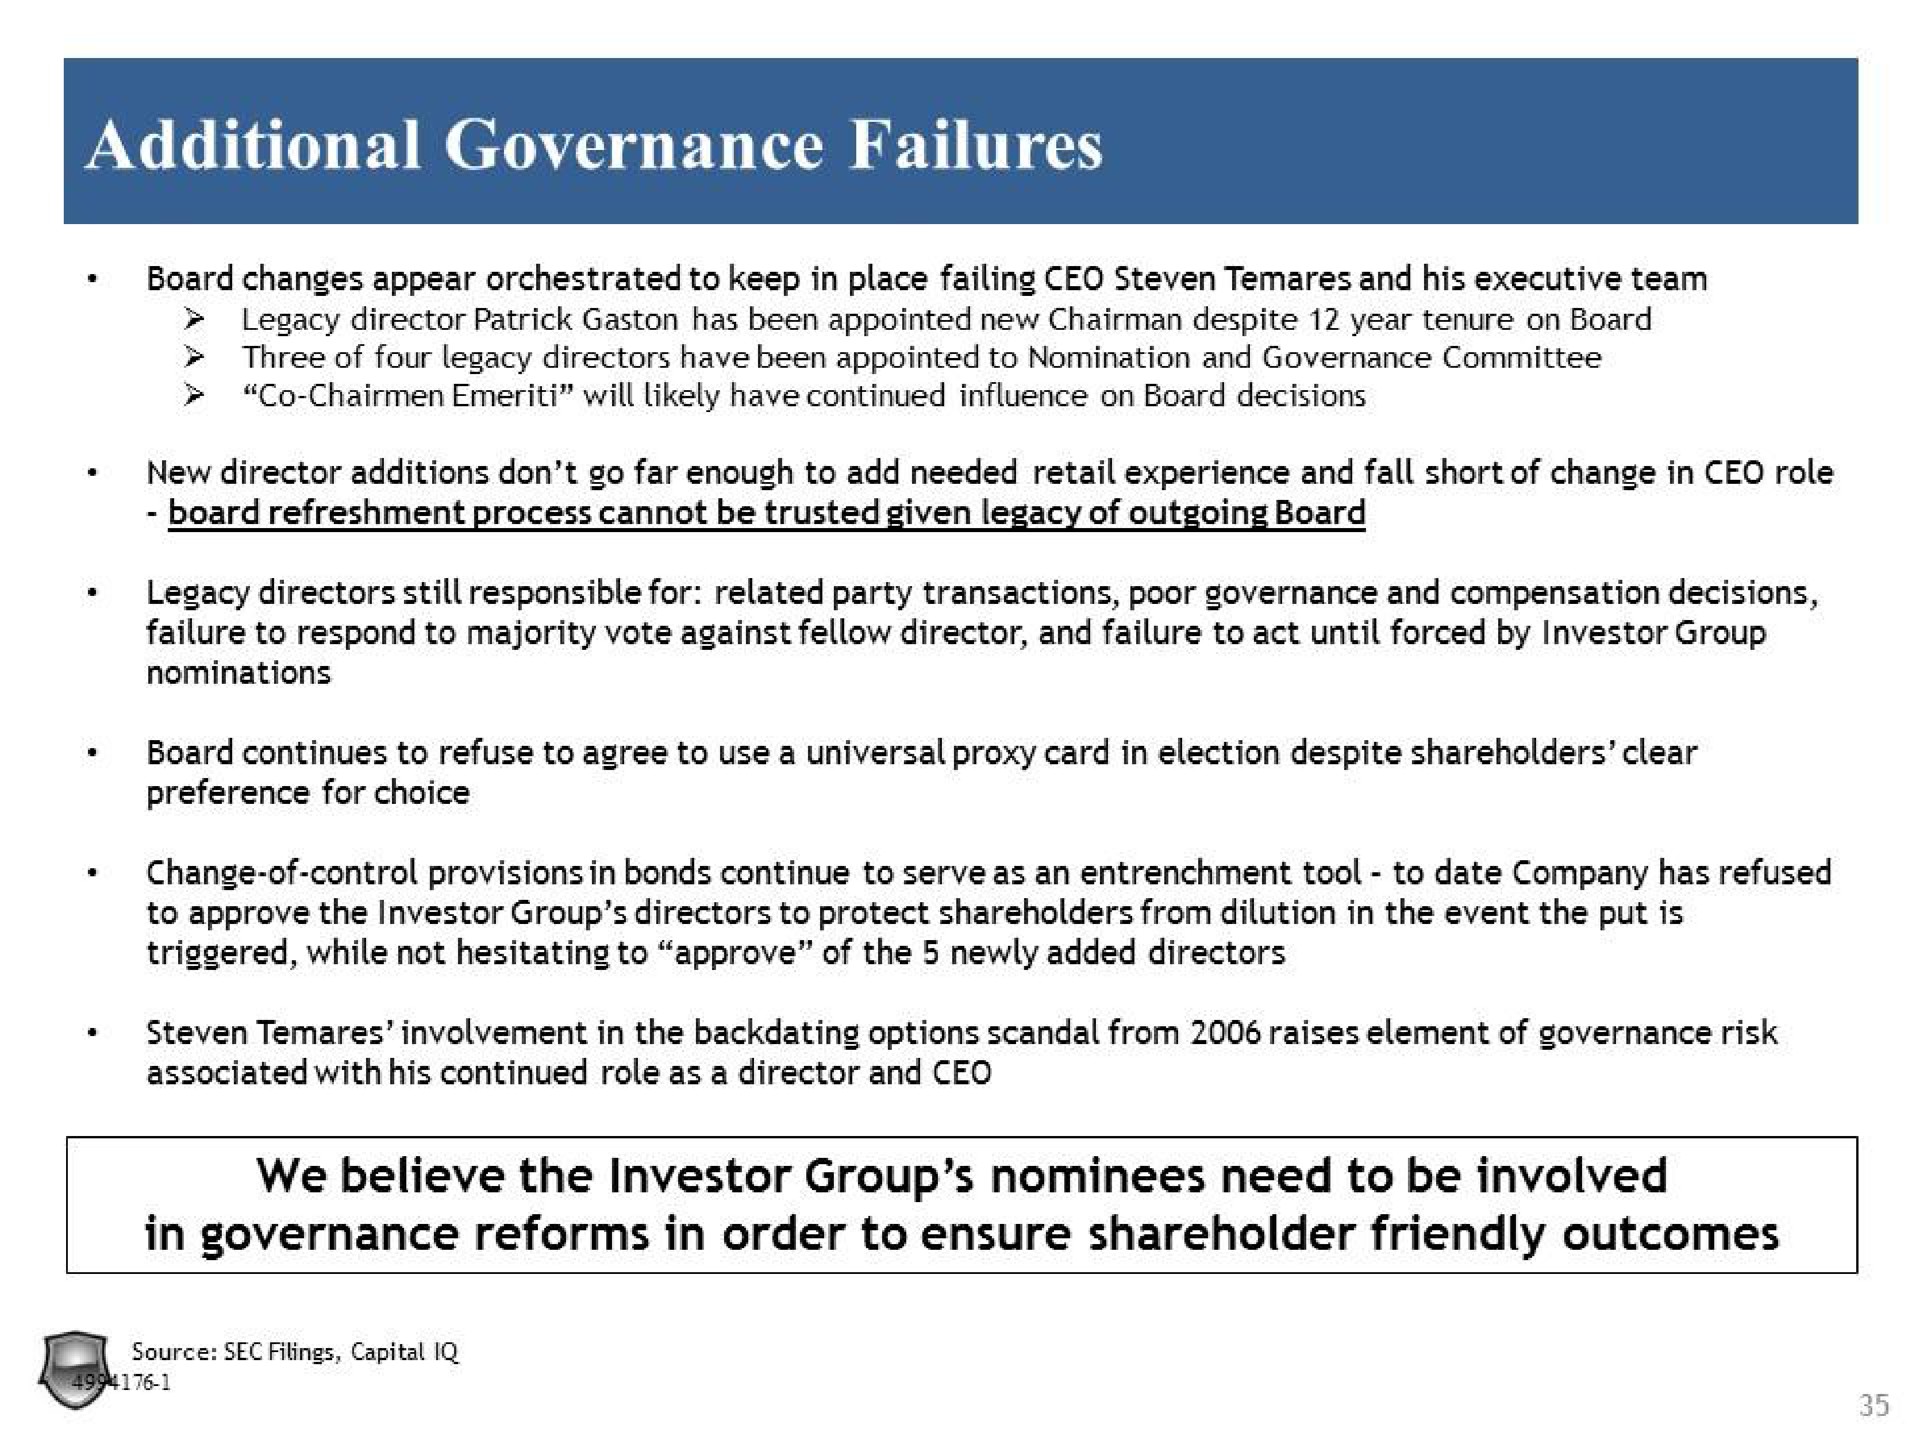 additional governance failures we believe the investor group nominees need to be involved in governance reforms in order to ensure shareholder friendly outcomes | Legion Partners